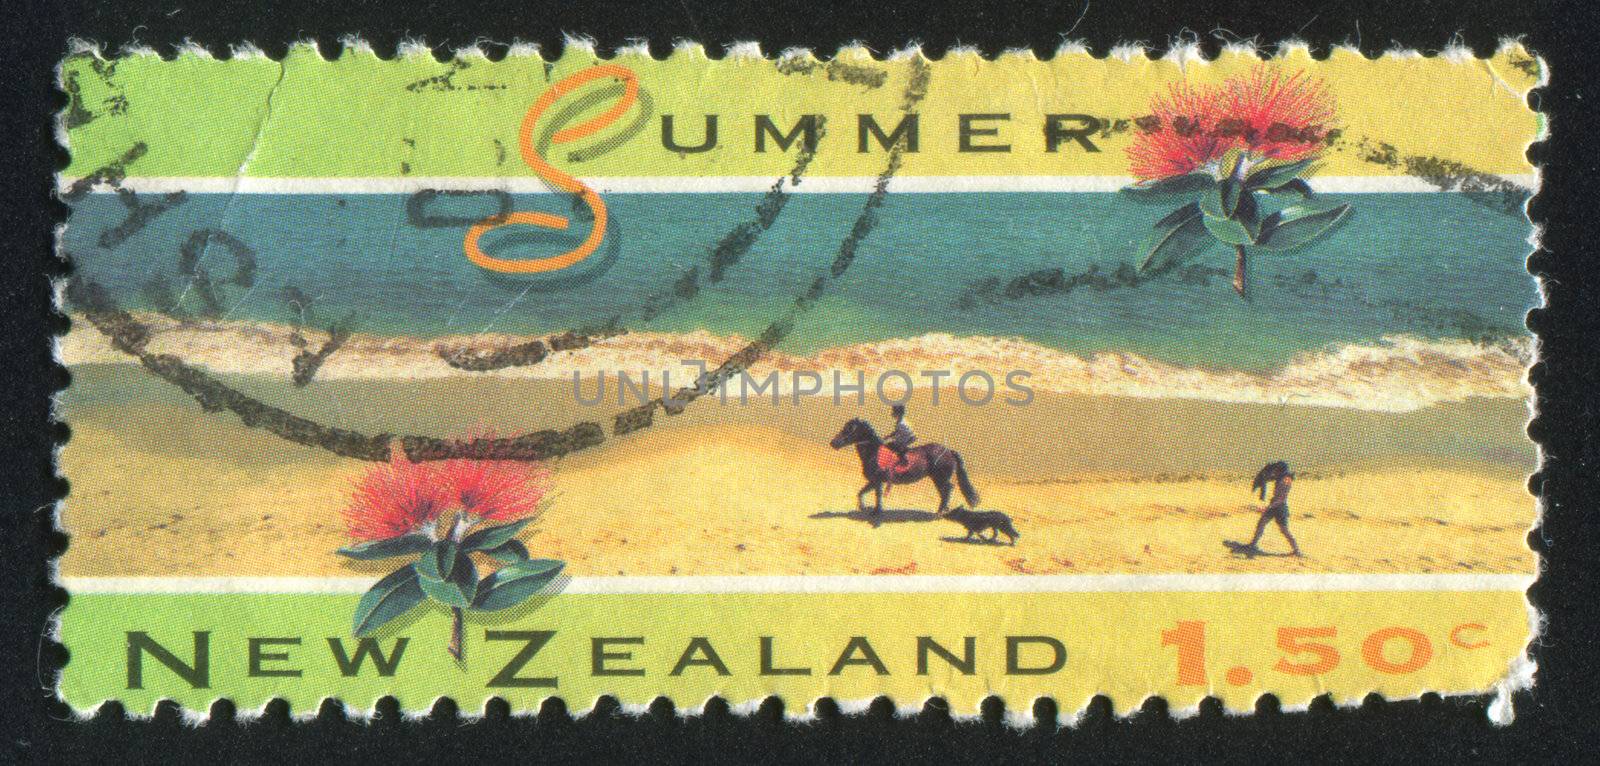 NEW ZEALAND - CIRCA 1994: stamp printed by New Zealand, shows Scenic Views of the Four Seasons, Summer, Opononi, pohutukawa flower, circa 1994